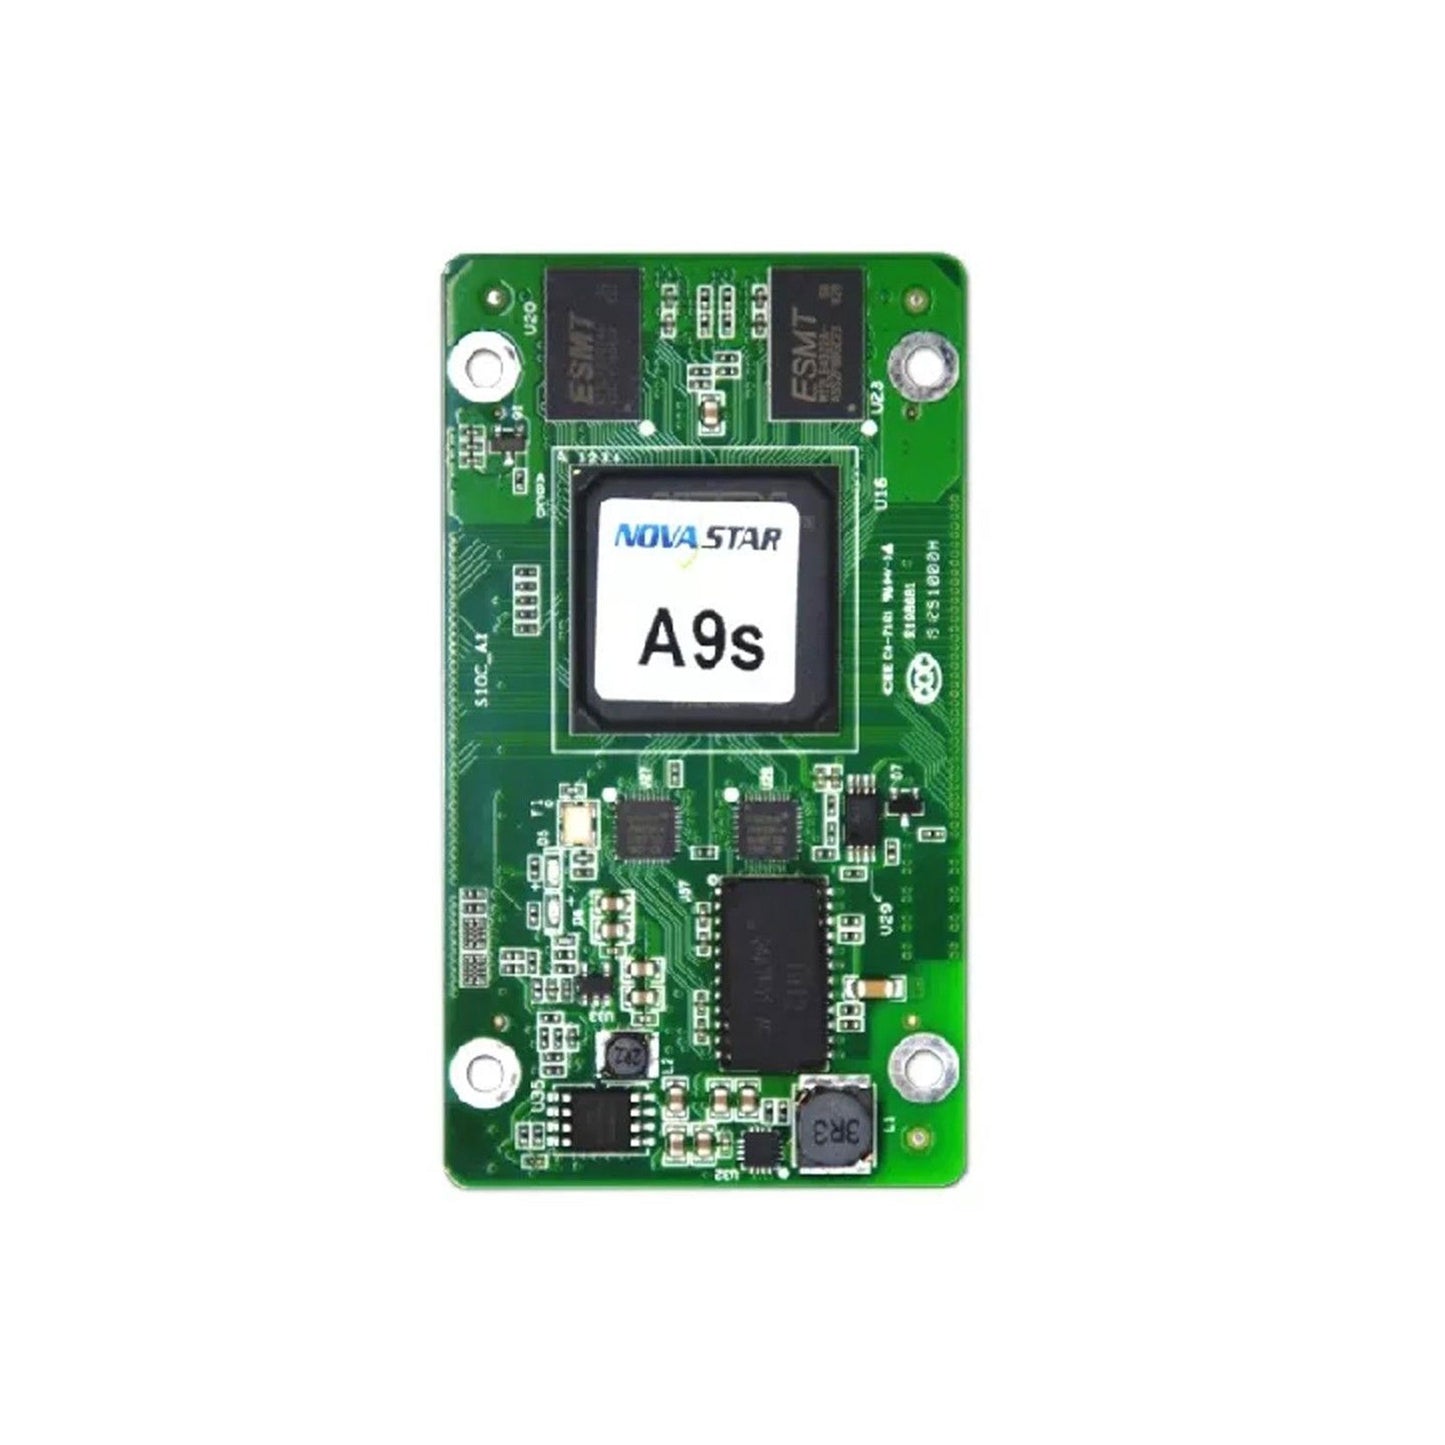 A9s LED Receiving Card